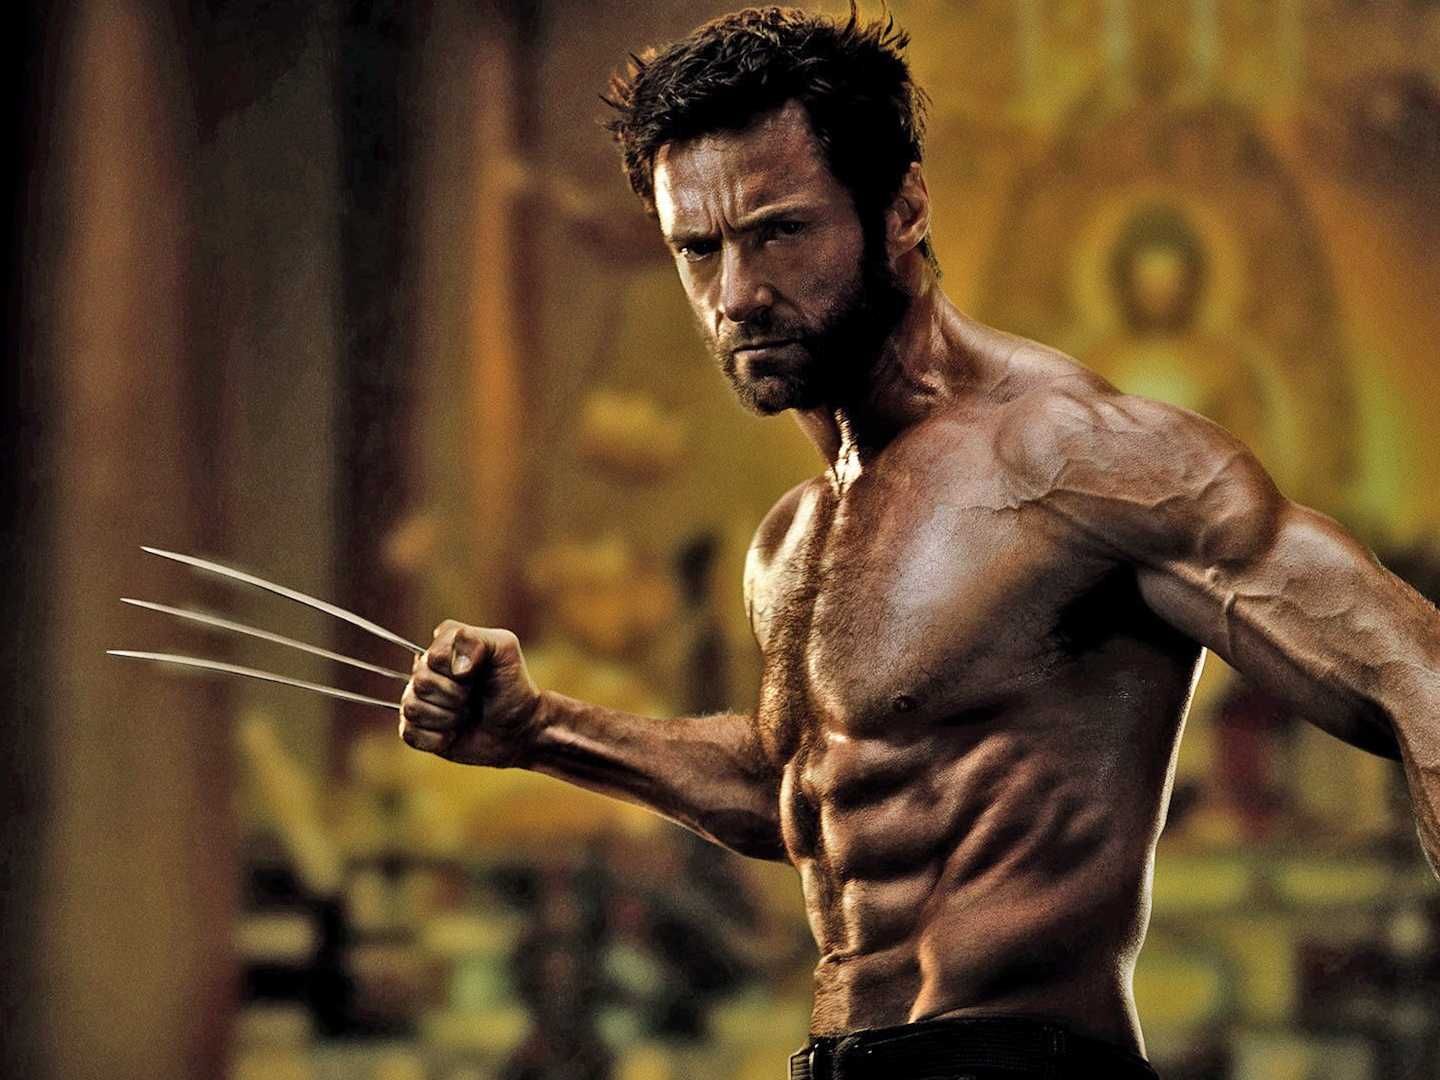 Hugh Jackman accepts any possible replacement of him as Wolverine